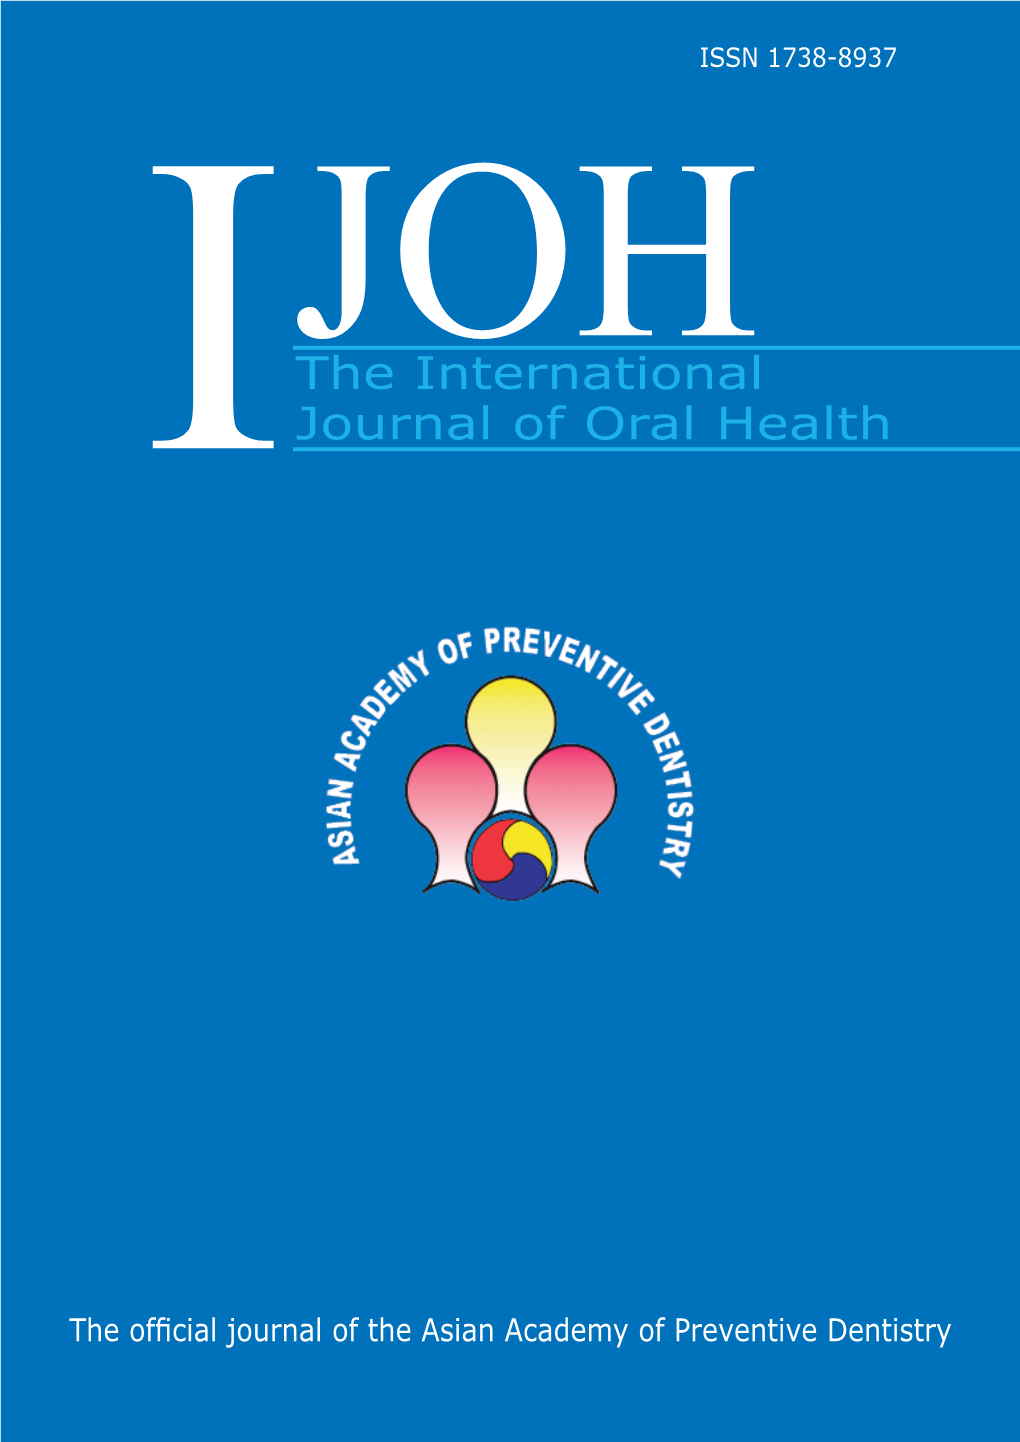 Ithe International Journal of Oral Health